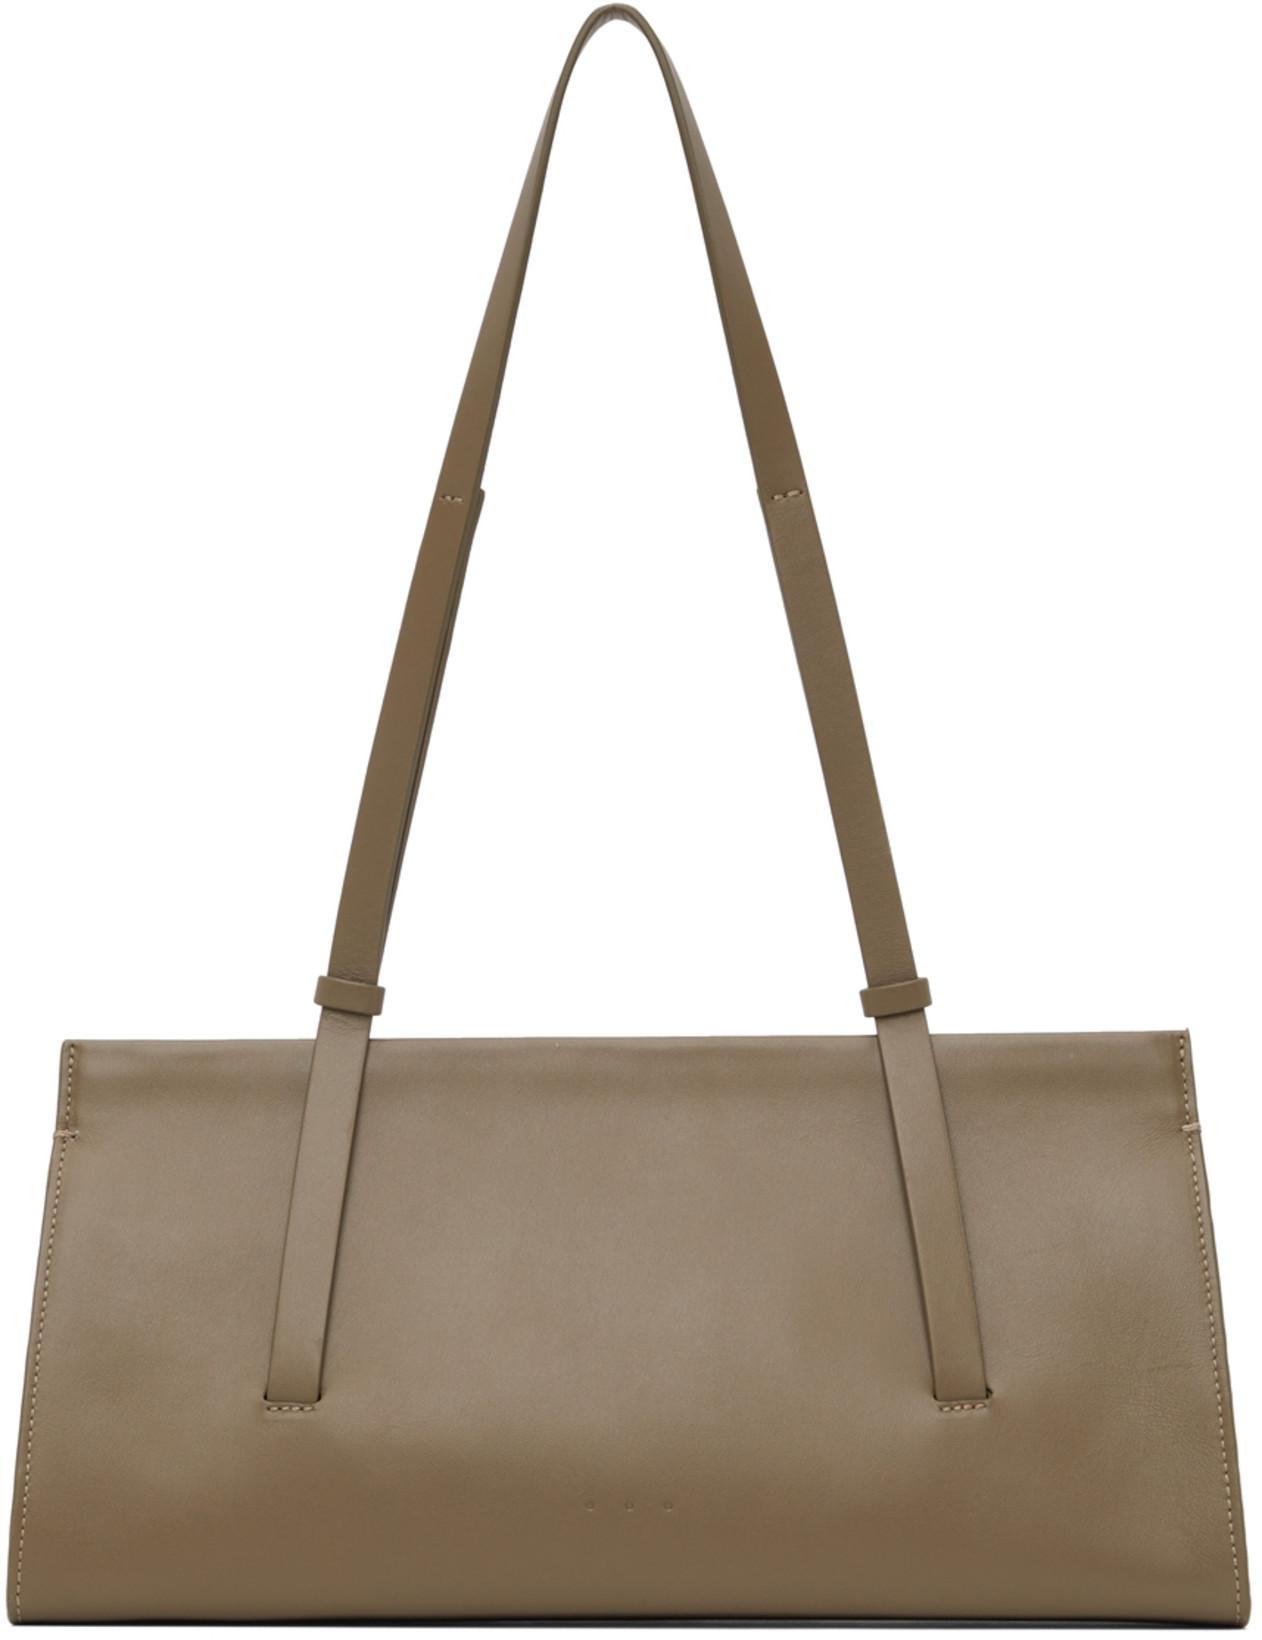 Taupe Baguette Bag by AESTHER EKME